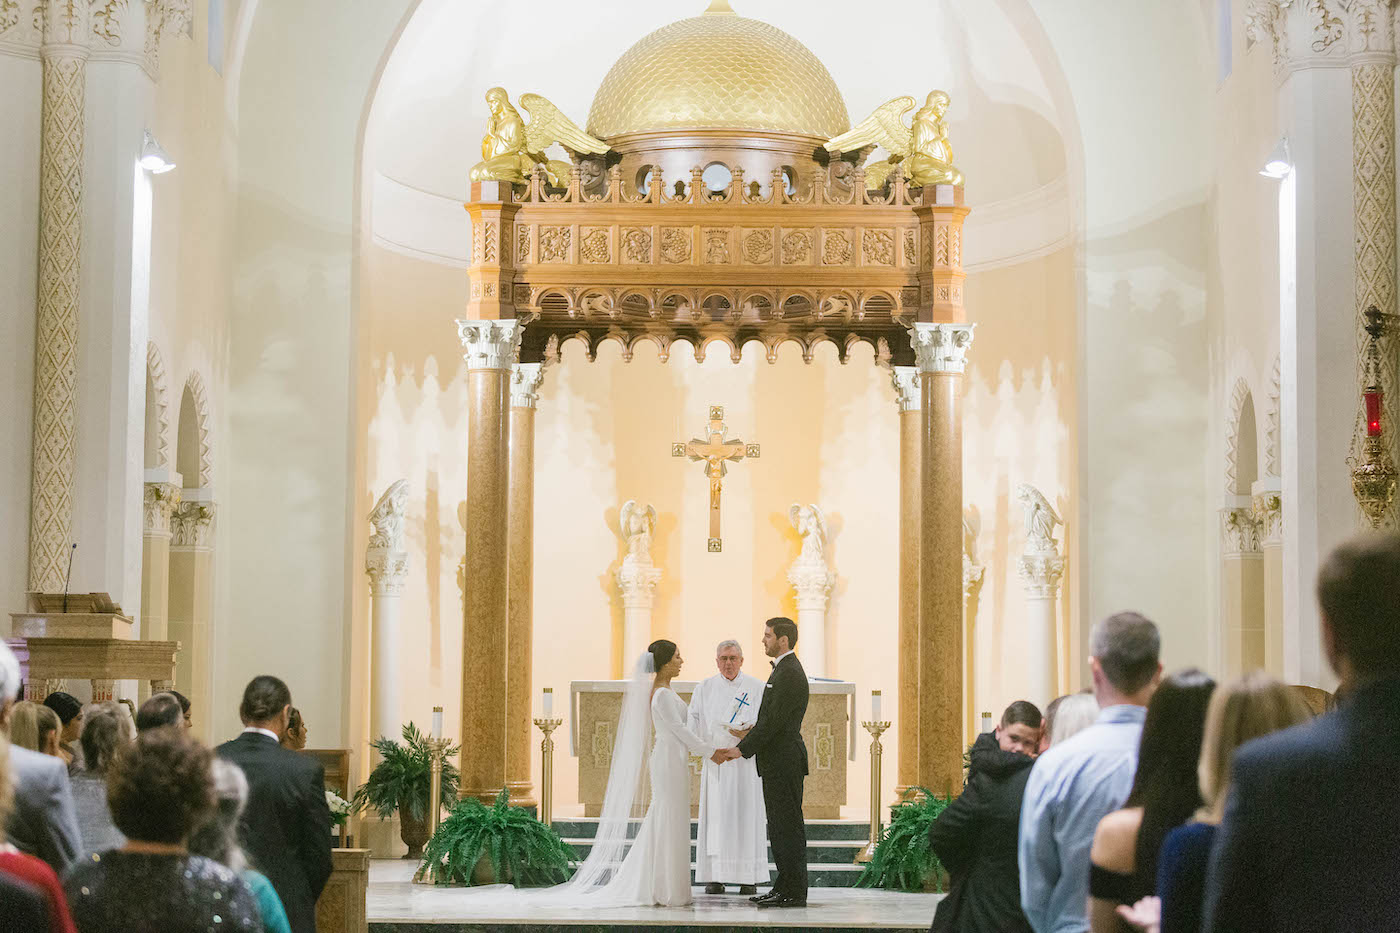 Florida Bride and Groom Exchange Vows in Traditional Matrimony Mass | Florida Wedding Venue St. Mary Our Lady of Grace Catholic Church | Tampa Bay Wedding Planner Parties A'La Carte